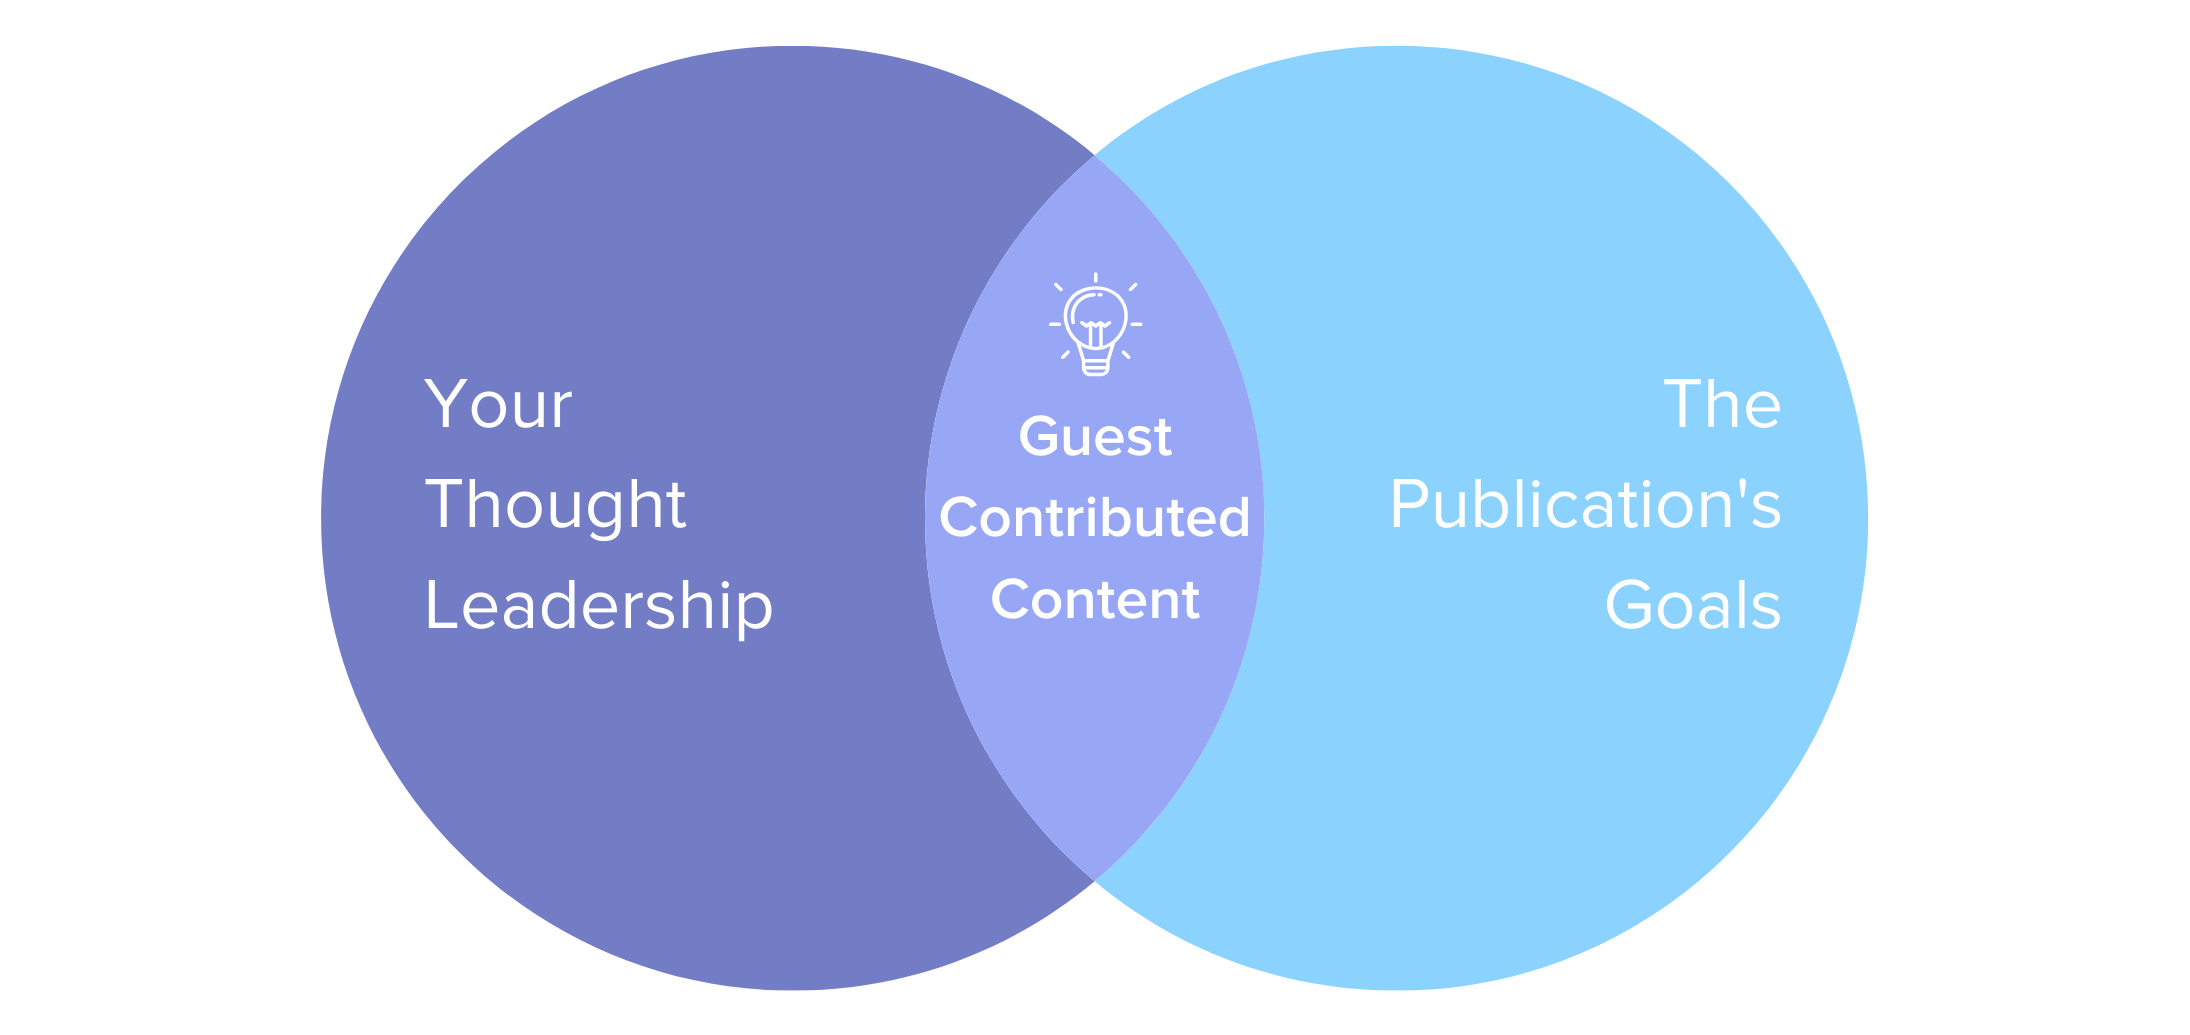 Guest posting venn diagram - your thought leadership, publications goals = guest-contributed content